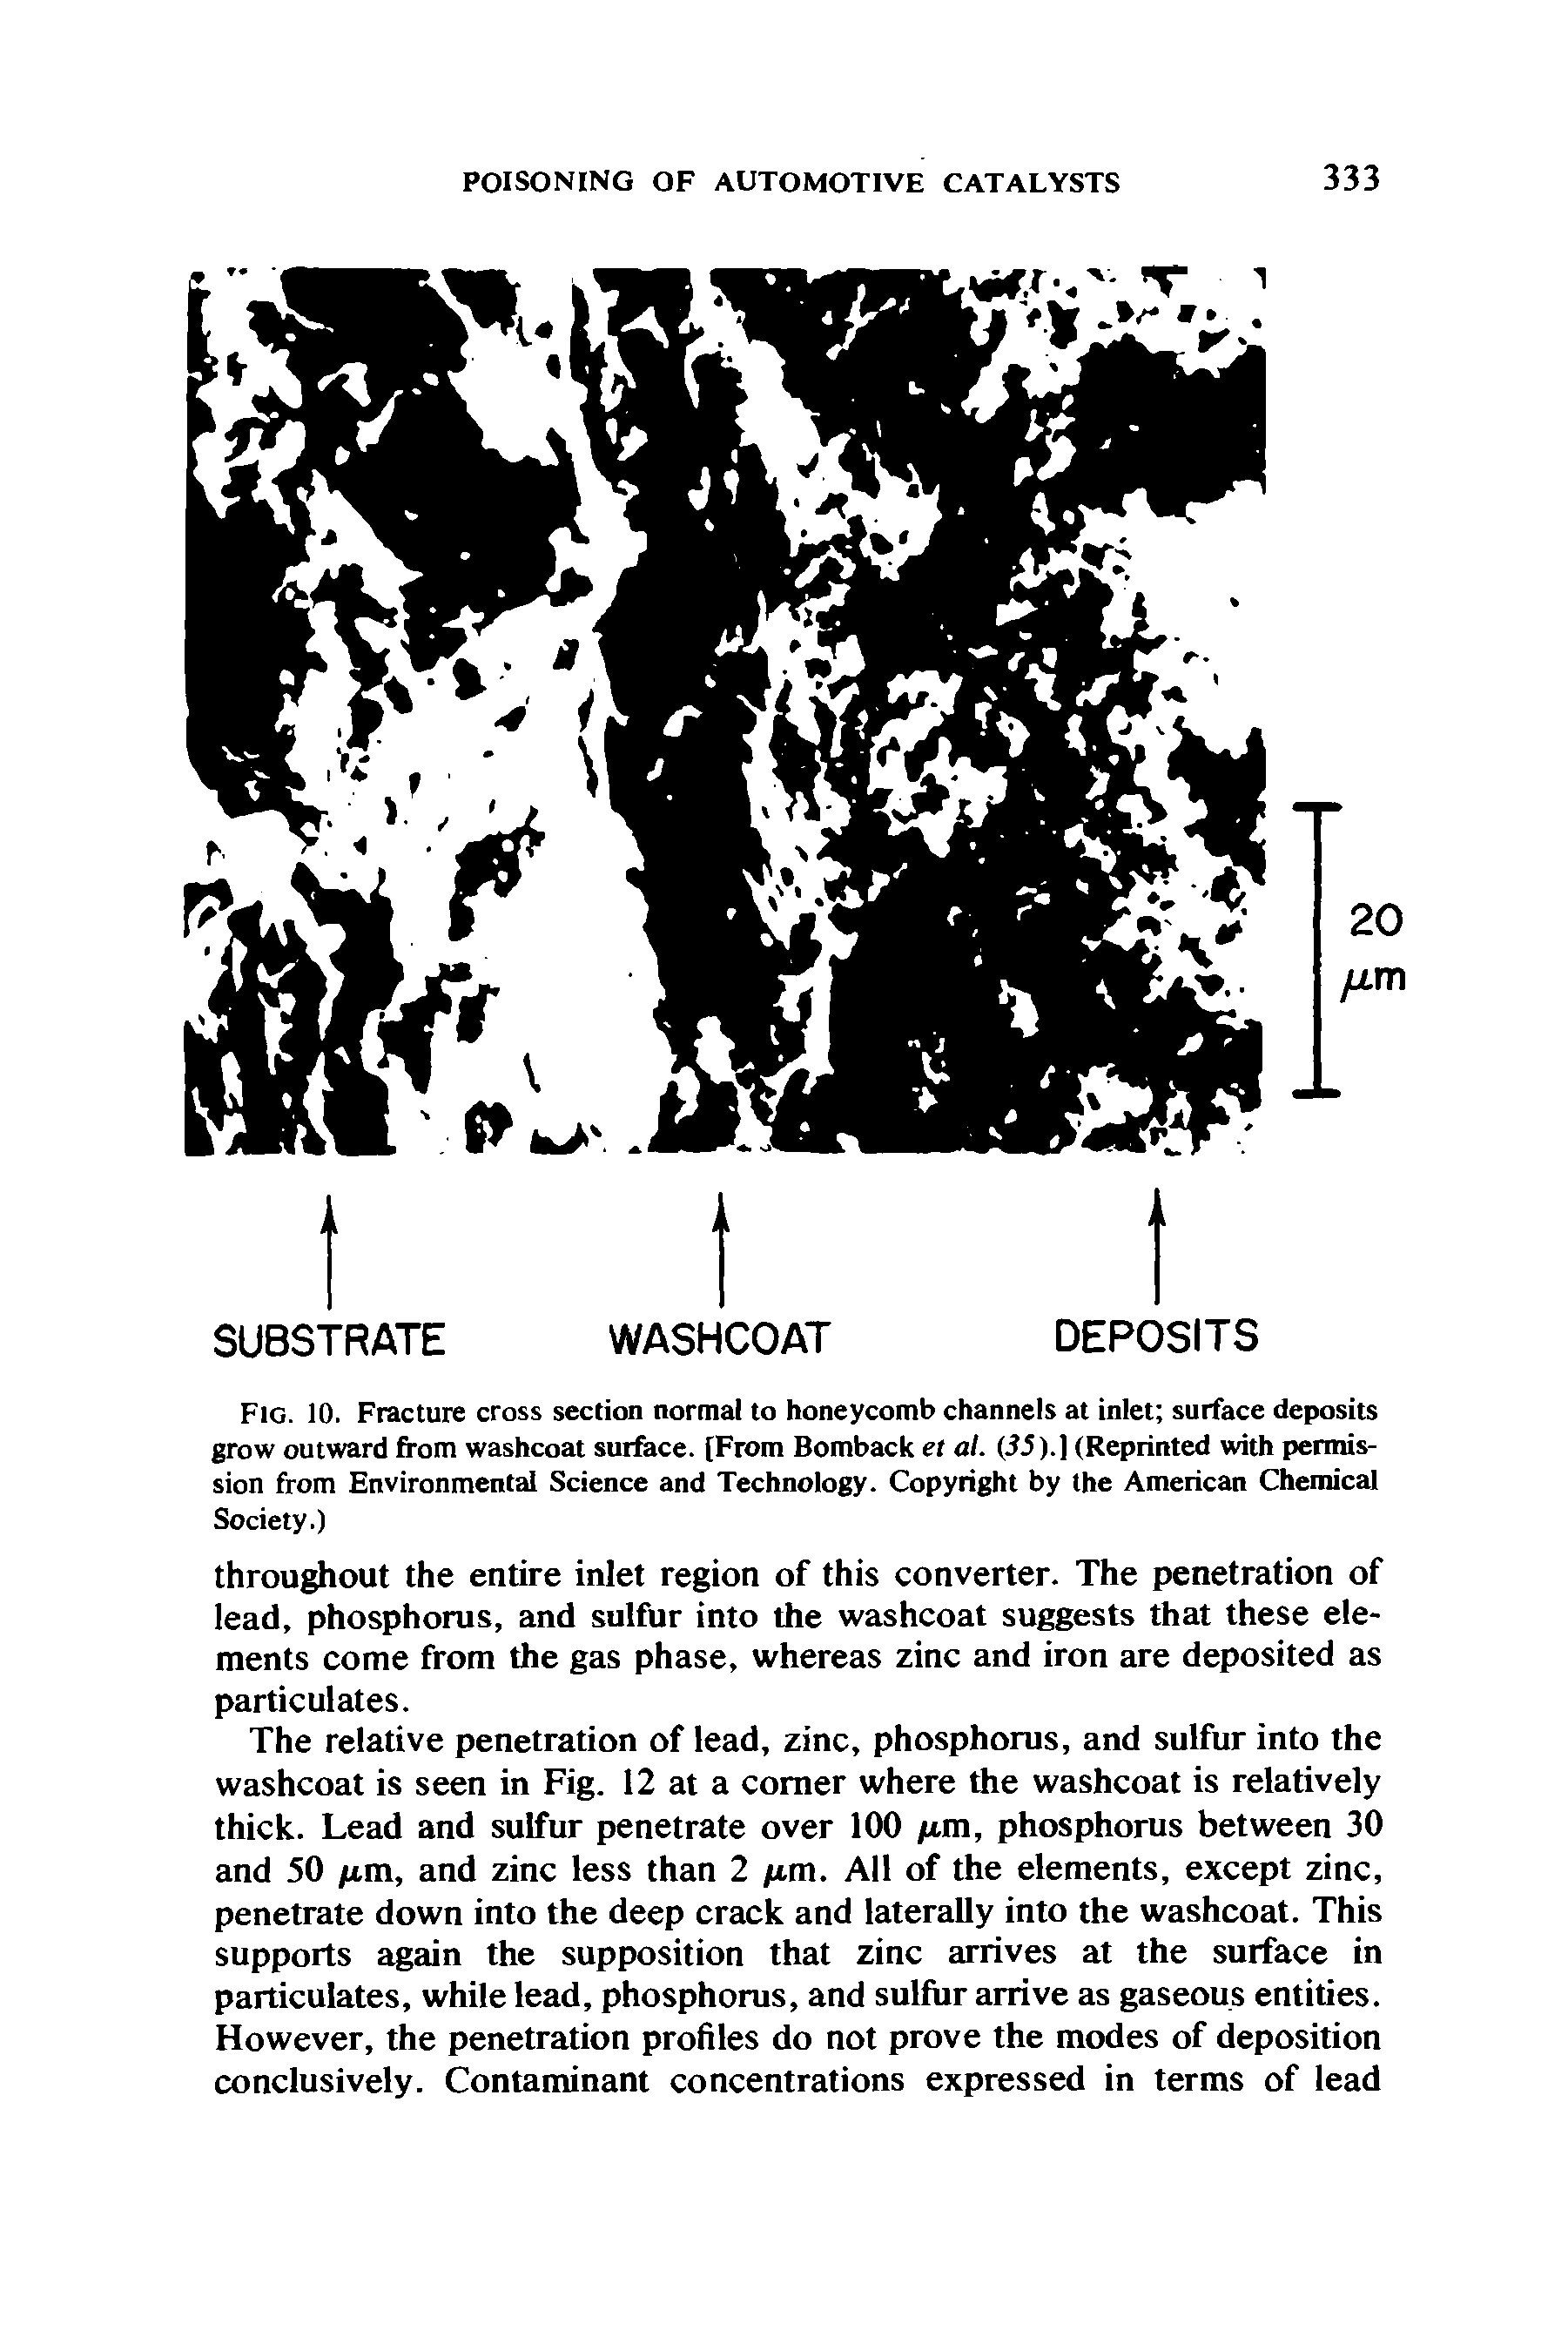 Fig. 10. Fracture cross section normal to honeycomb channels at inlet surface deposits grow outward from washcoat surface. [From Bomback et al. (35).] (Reprinted with permission from Environmental Science and Technology. Copyright by the American Chemical Society.)...